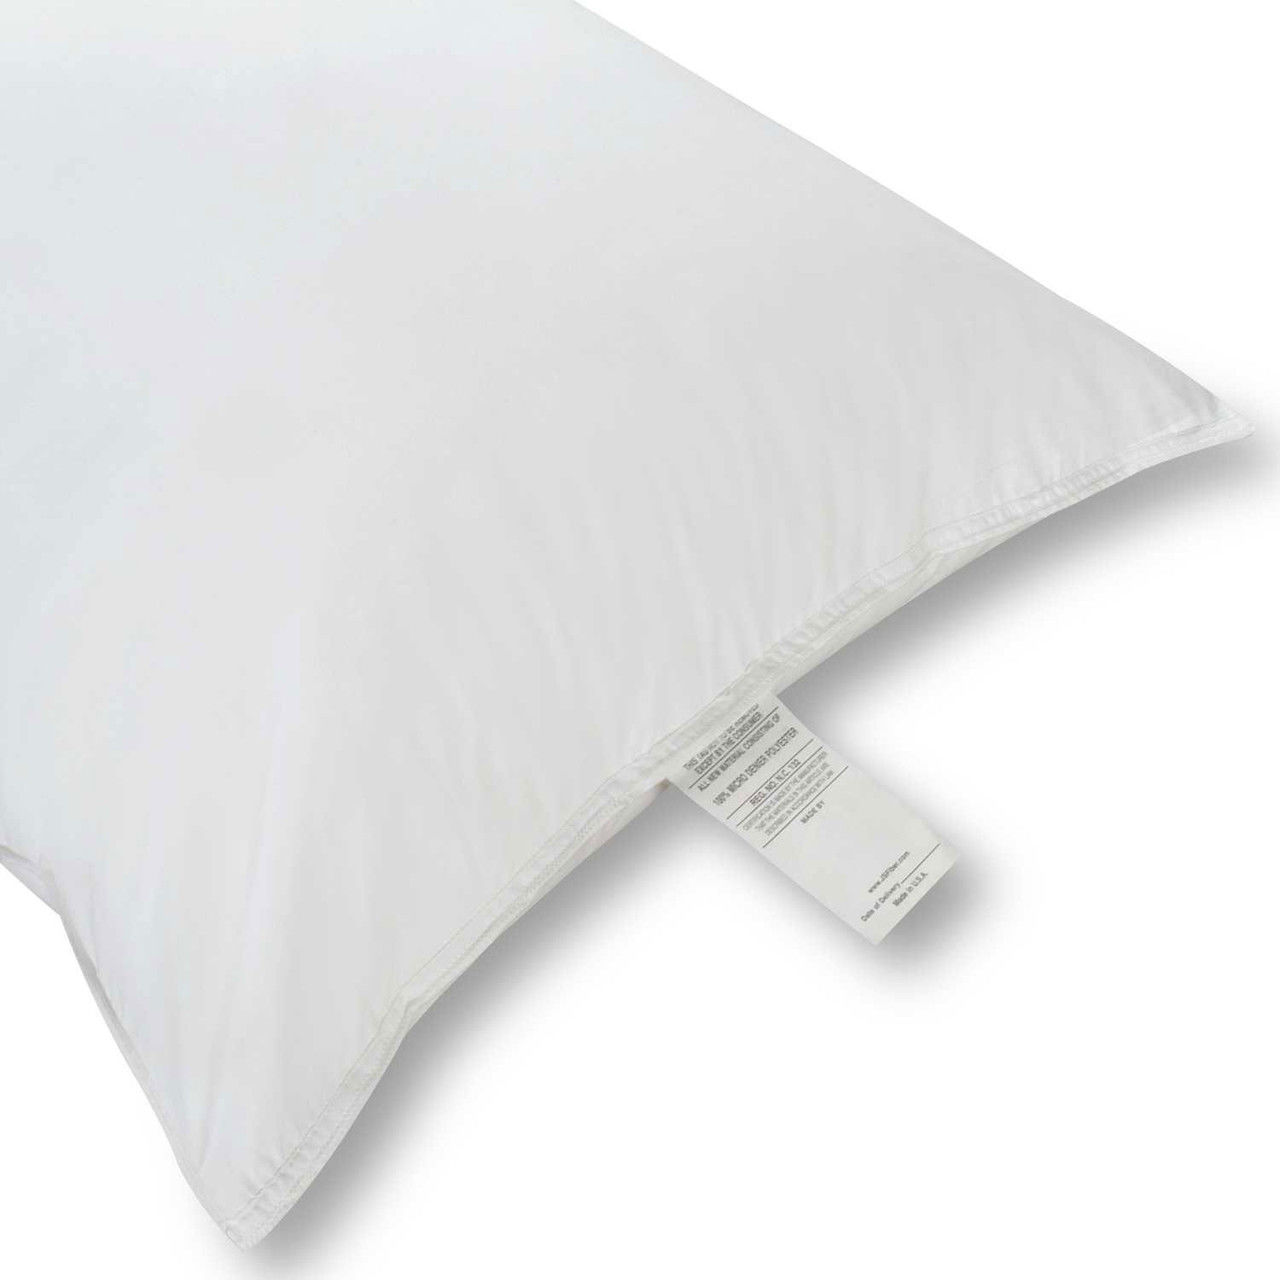 What sizes are available for the Micro Denier Hotel Collection Pillow?